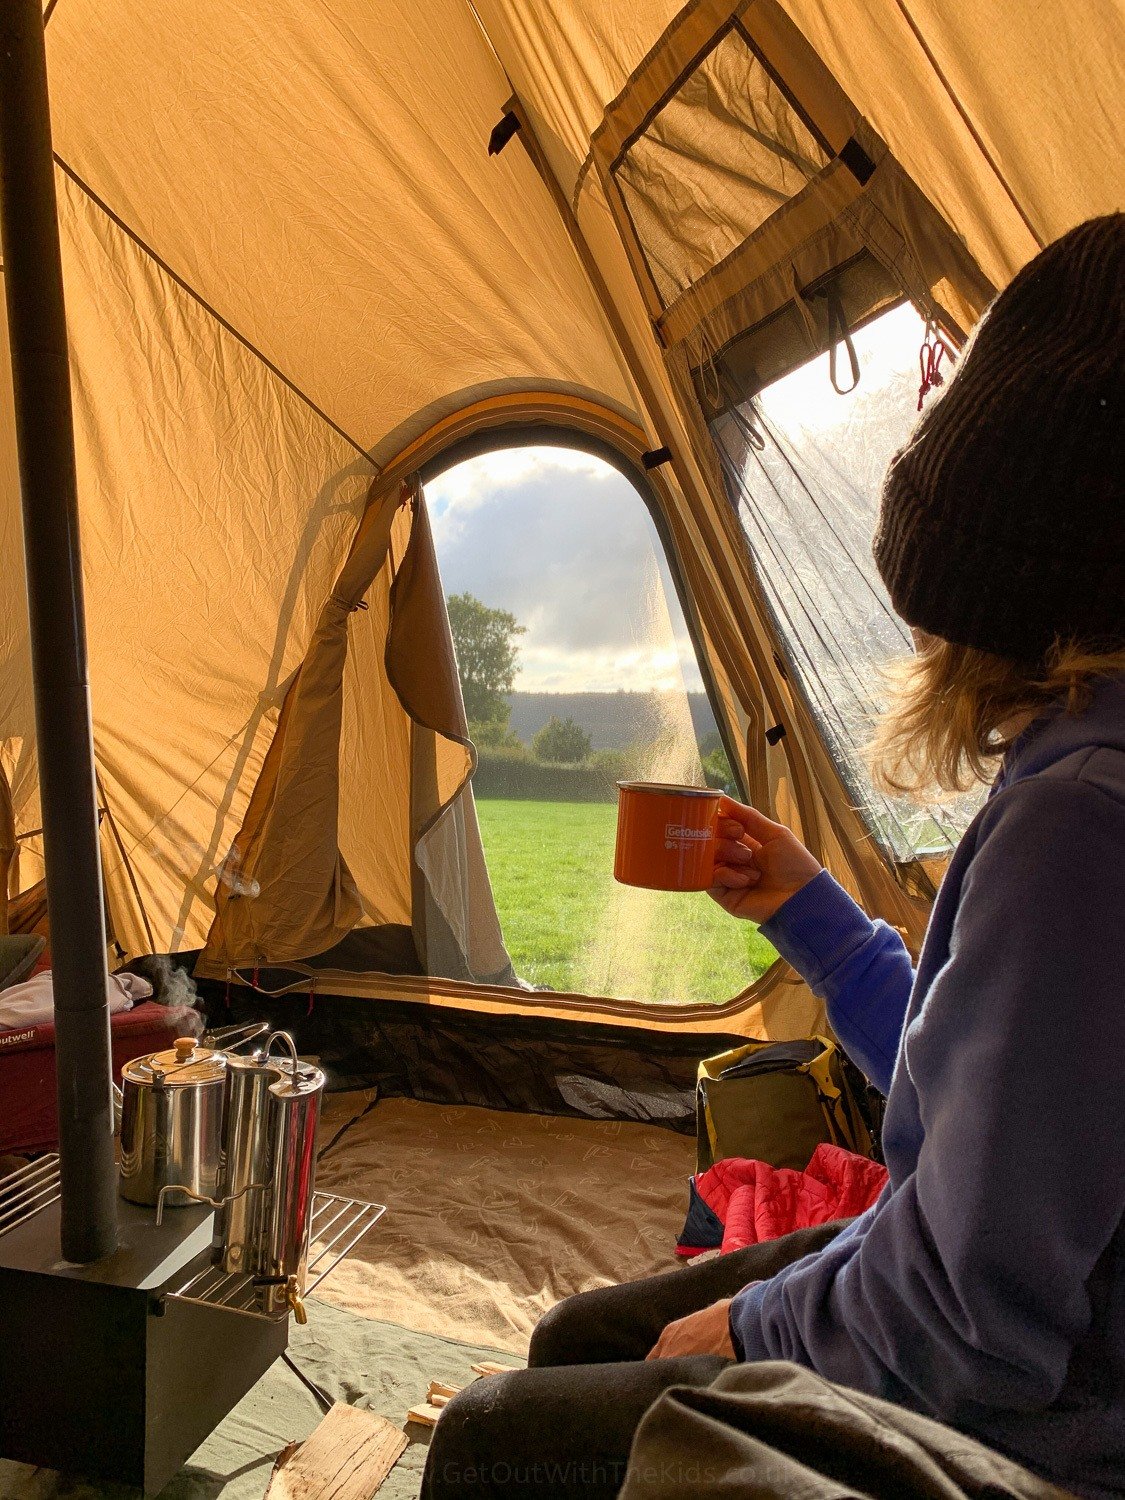 In tent with warm drink